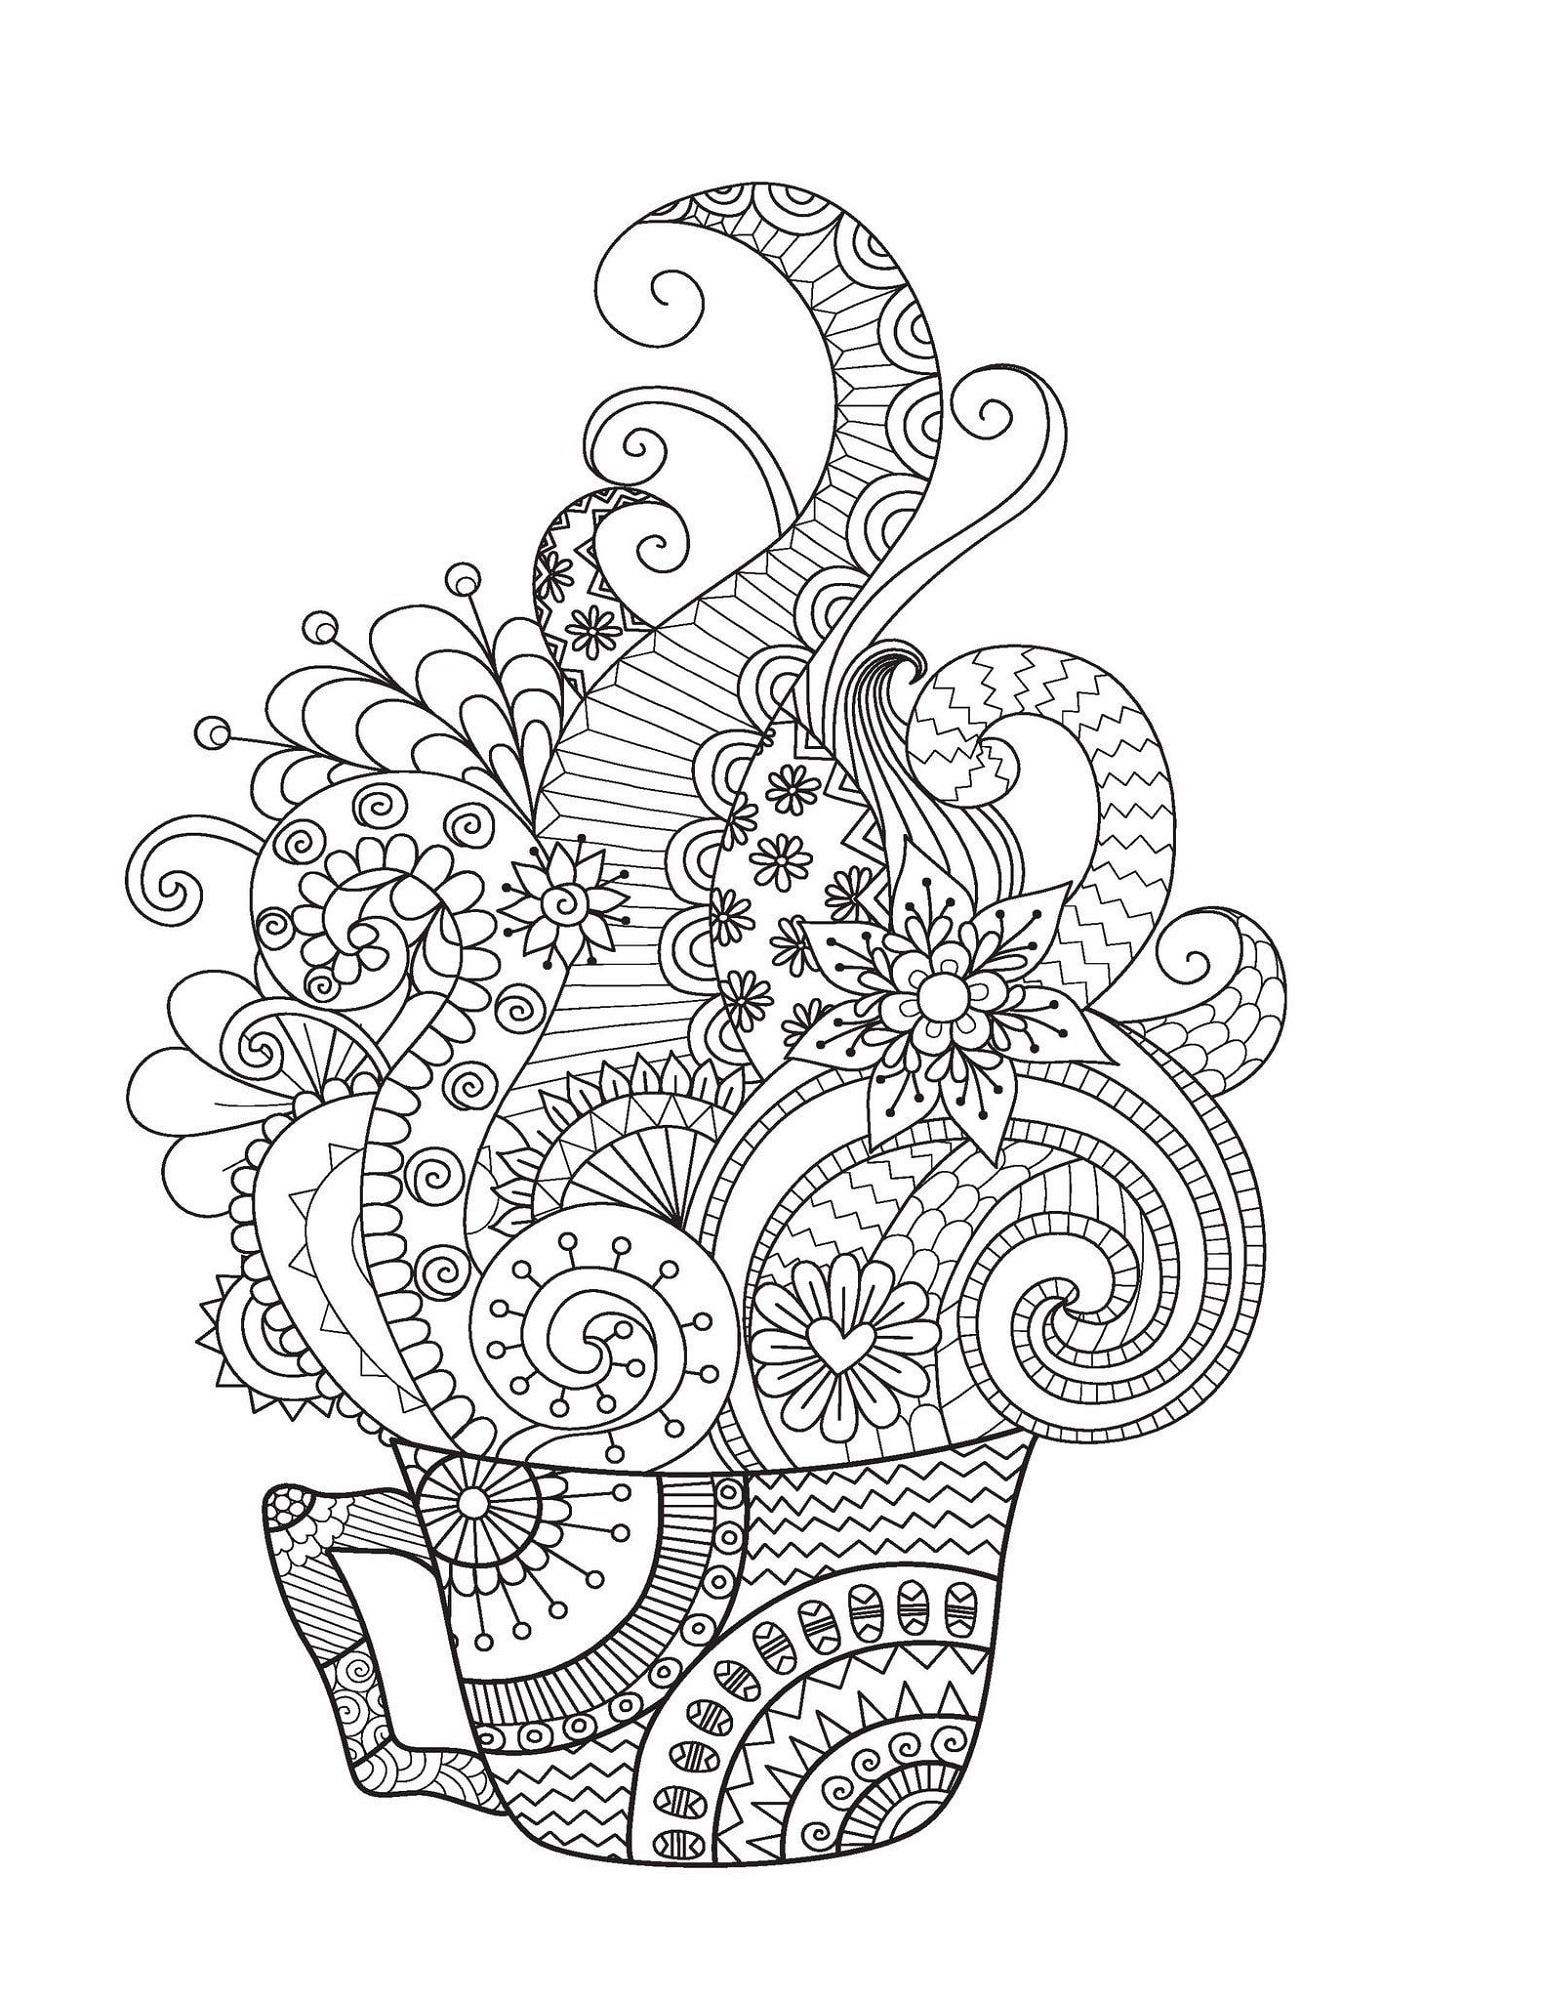 Design Pattern Coloring Pages For Adults